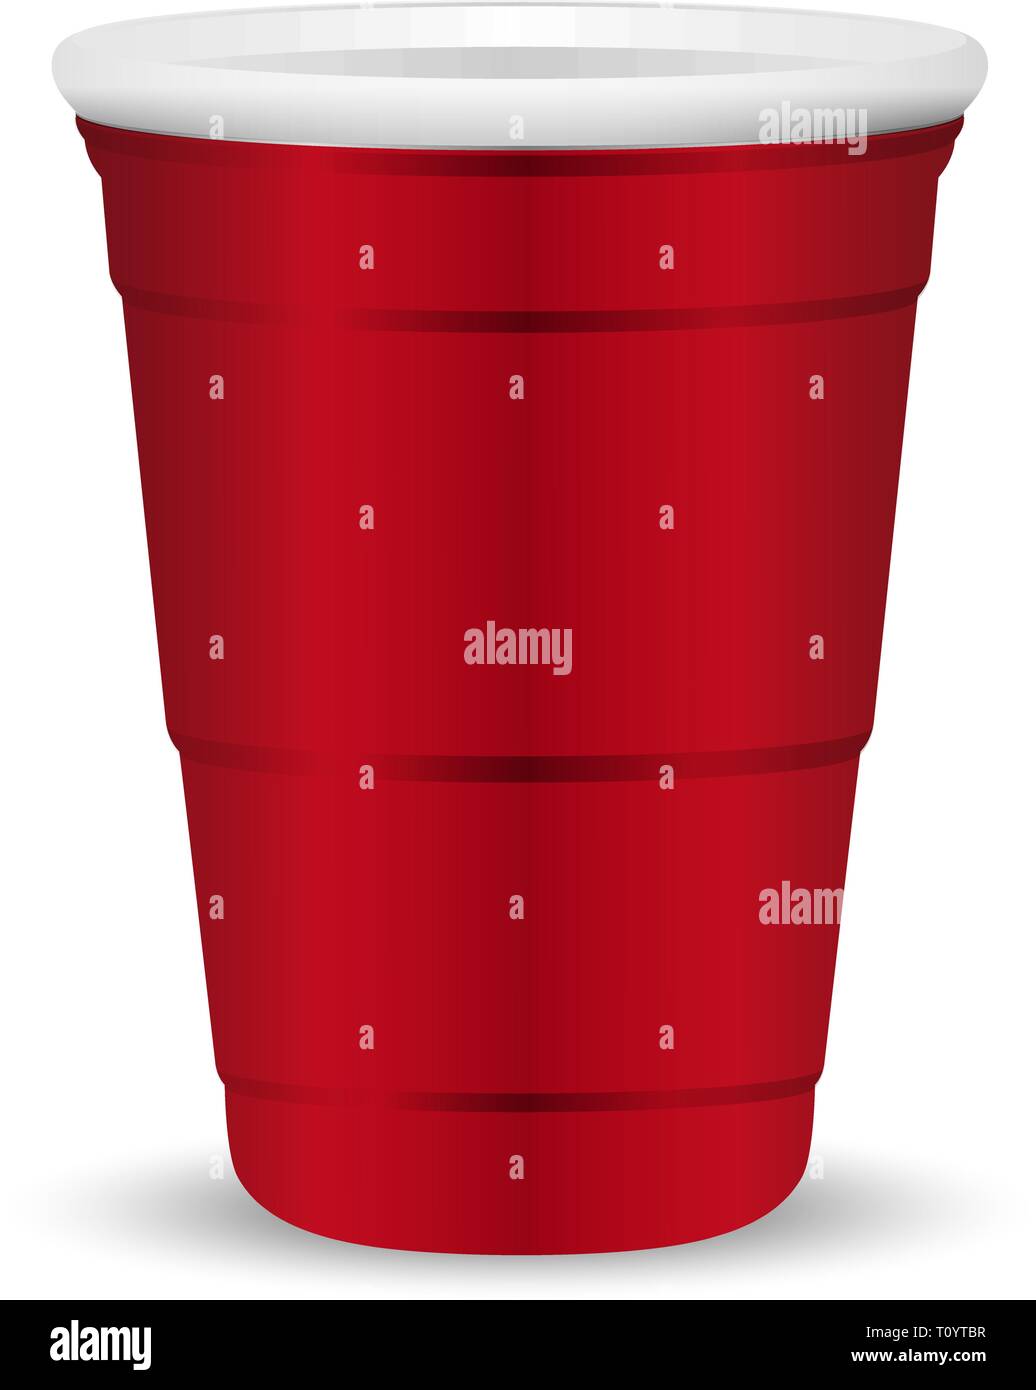 https://c8.alamy.com/comp/T0YTBR/red-party-cup-realistic-3d-vector-illustration-disposable-plastic-or-paper-container-mockup-for-drinks-and-fun-games-isolated-on-white-background-T0YTBR.jpg